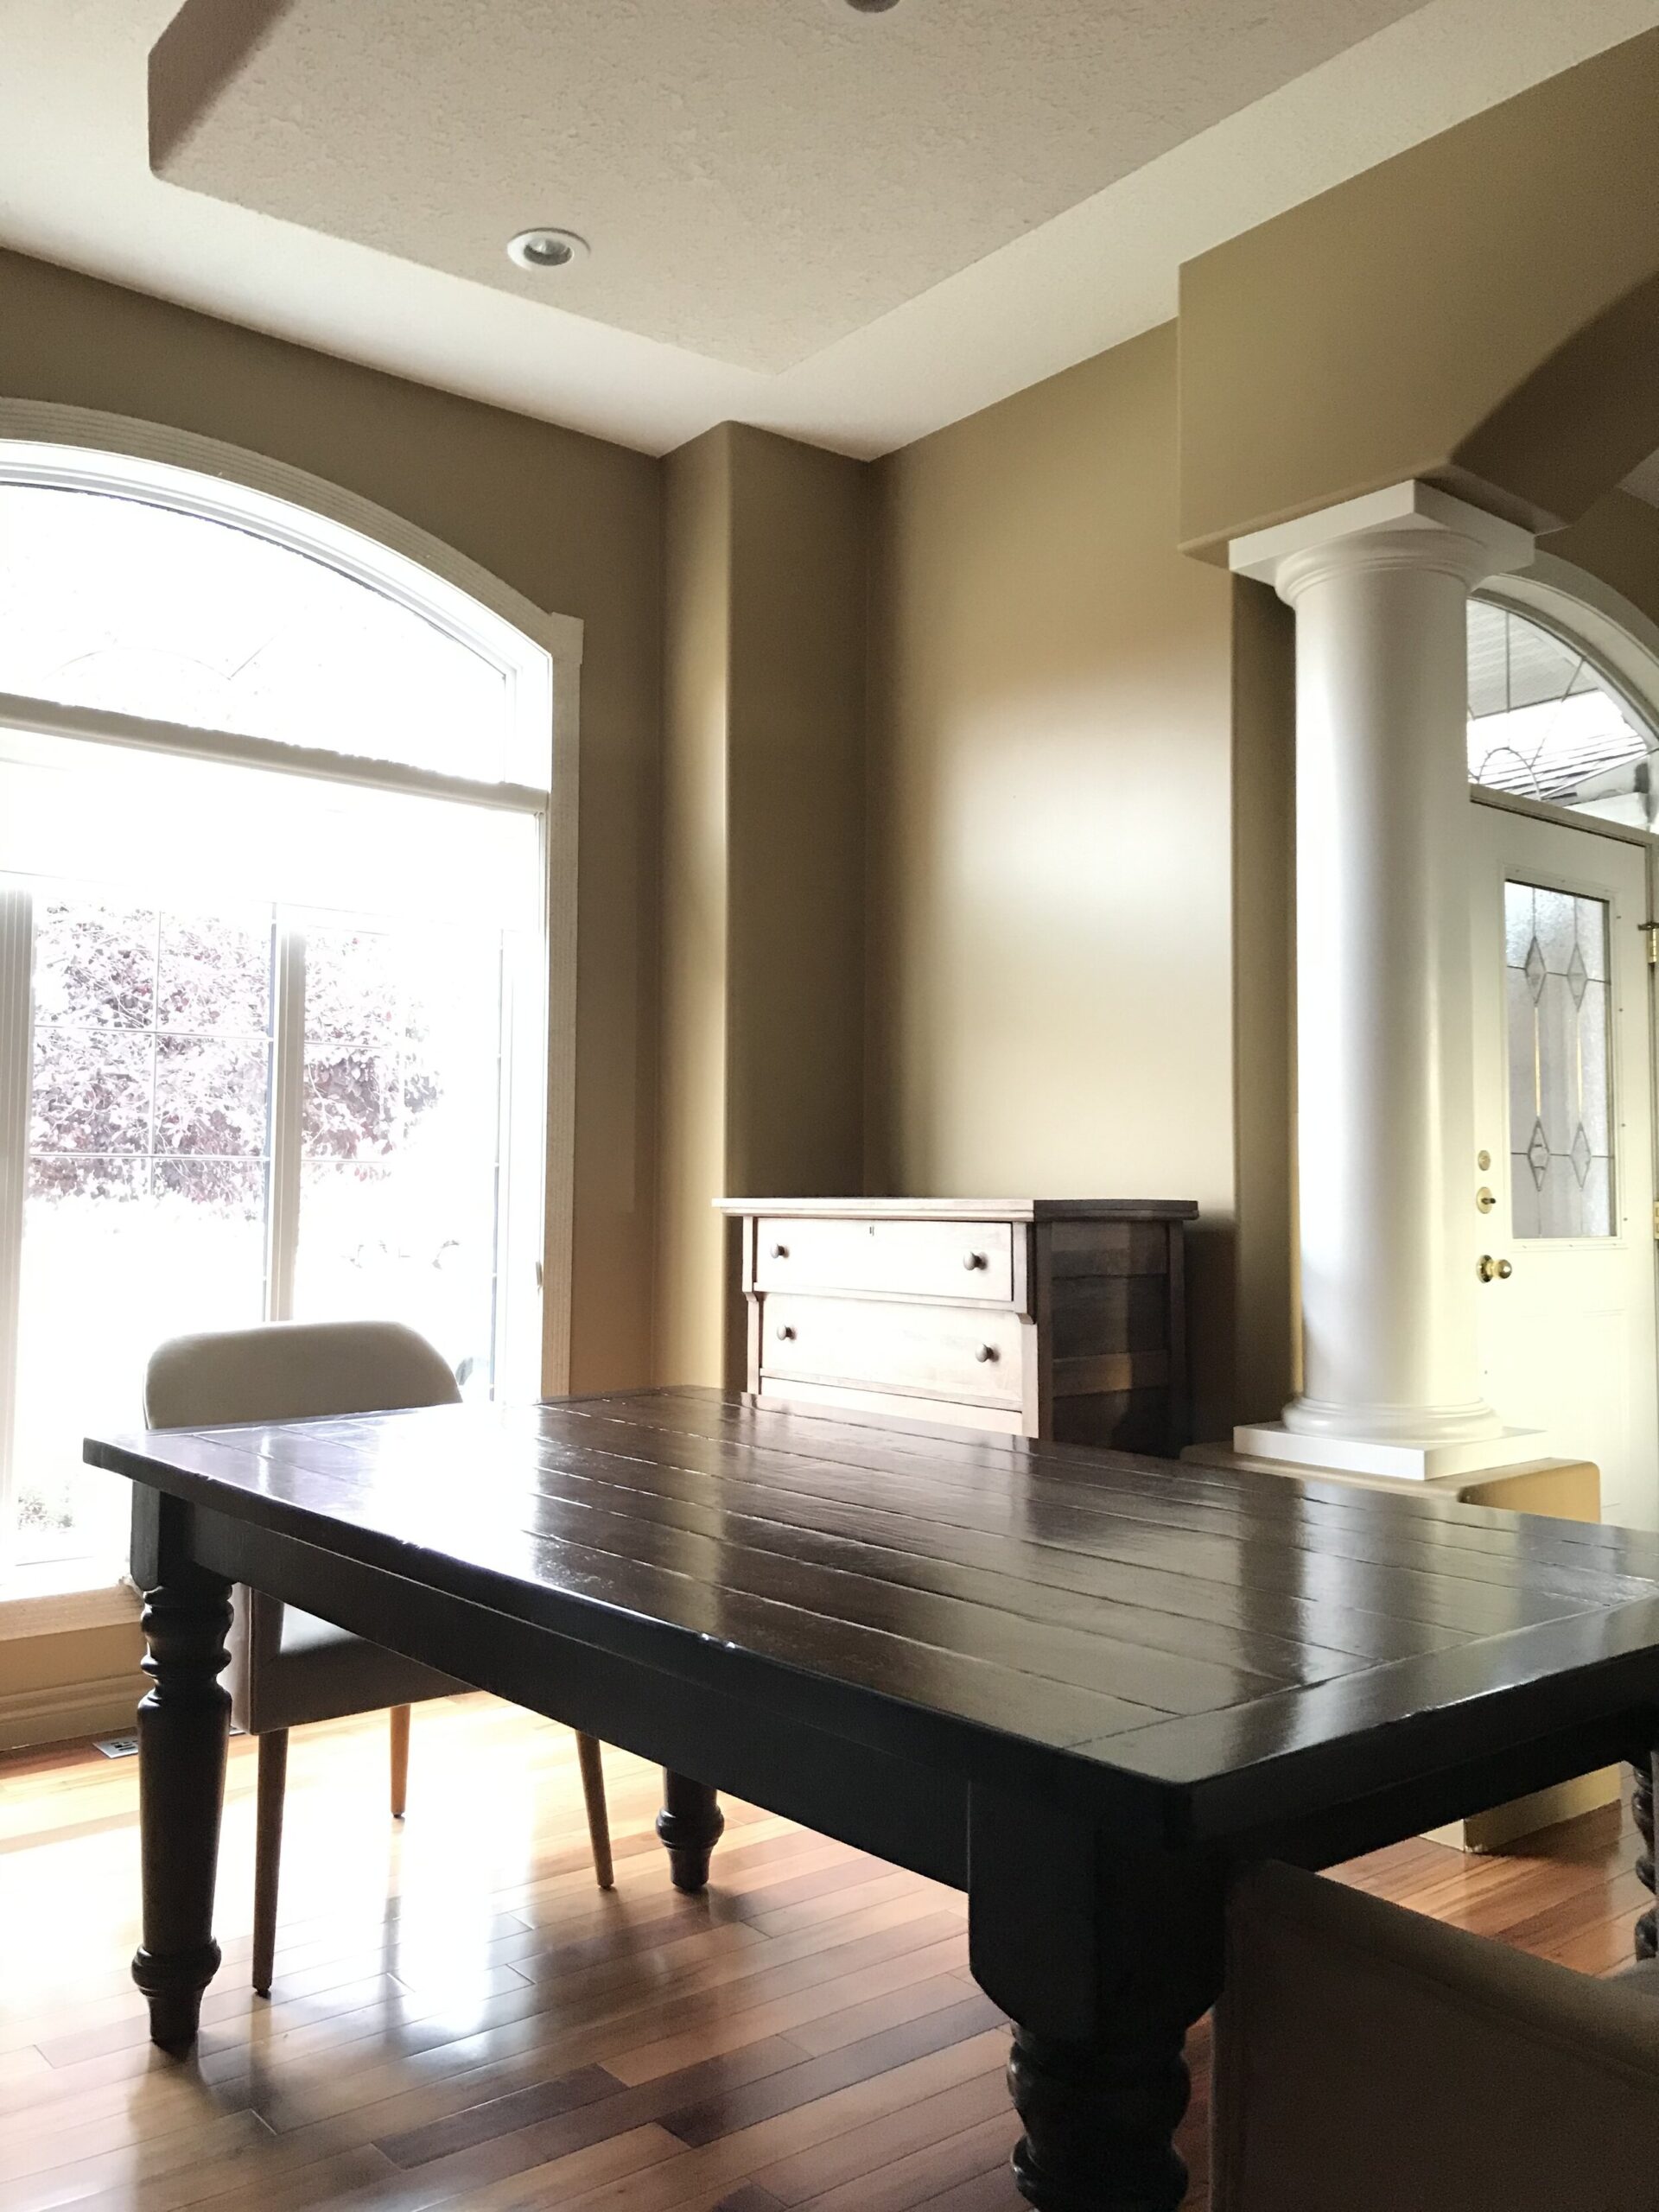 Dining room with columns next to opening, brown walls, wood table and dresser as sideboard